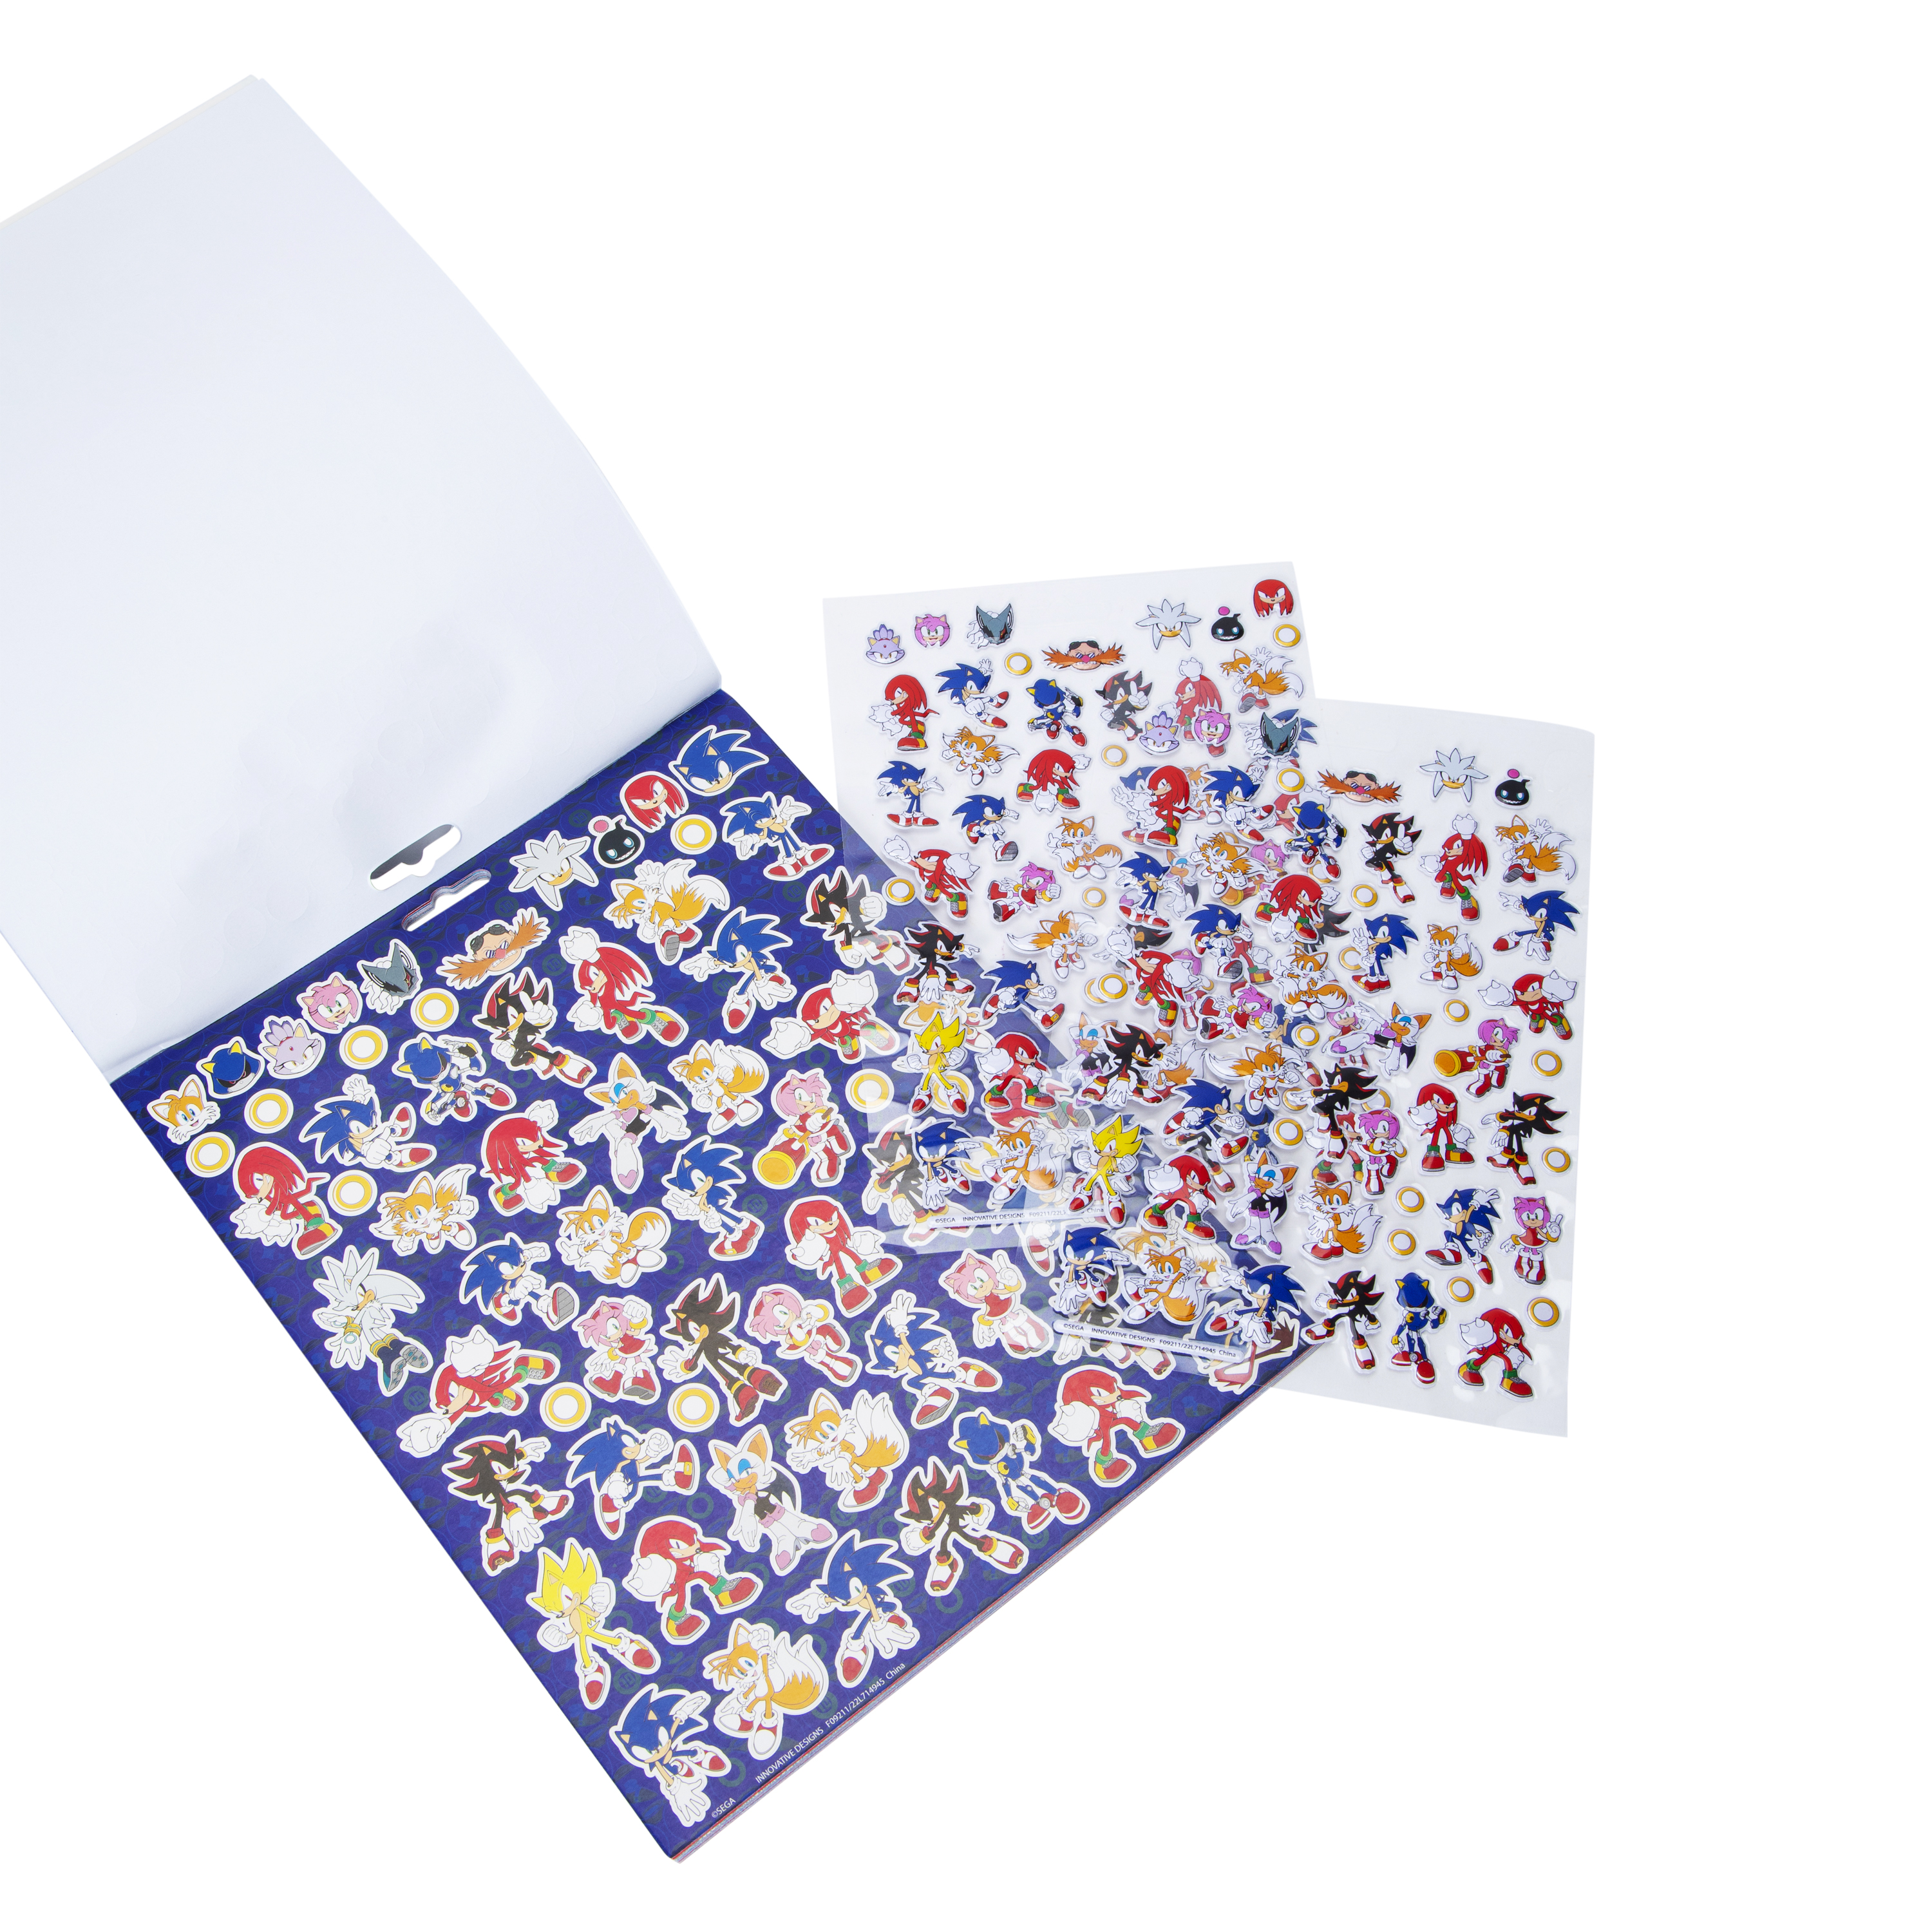 Sonic The Hedgehog™ Sticker Book With Over 1000 Stickers